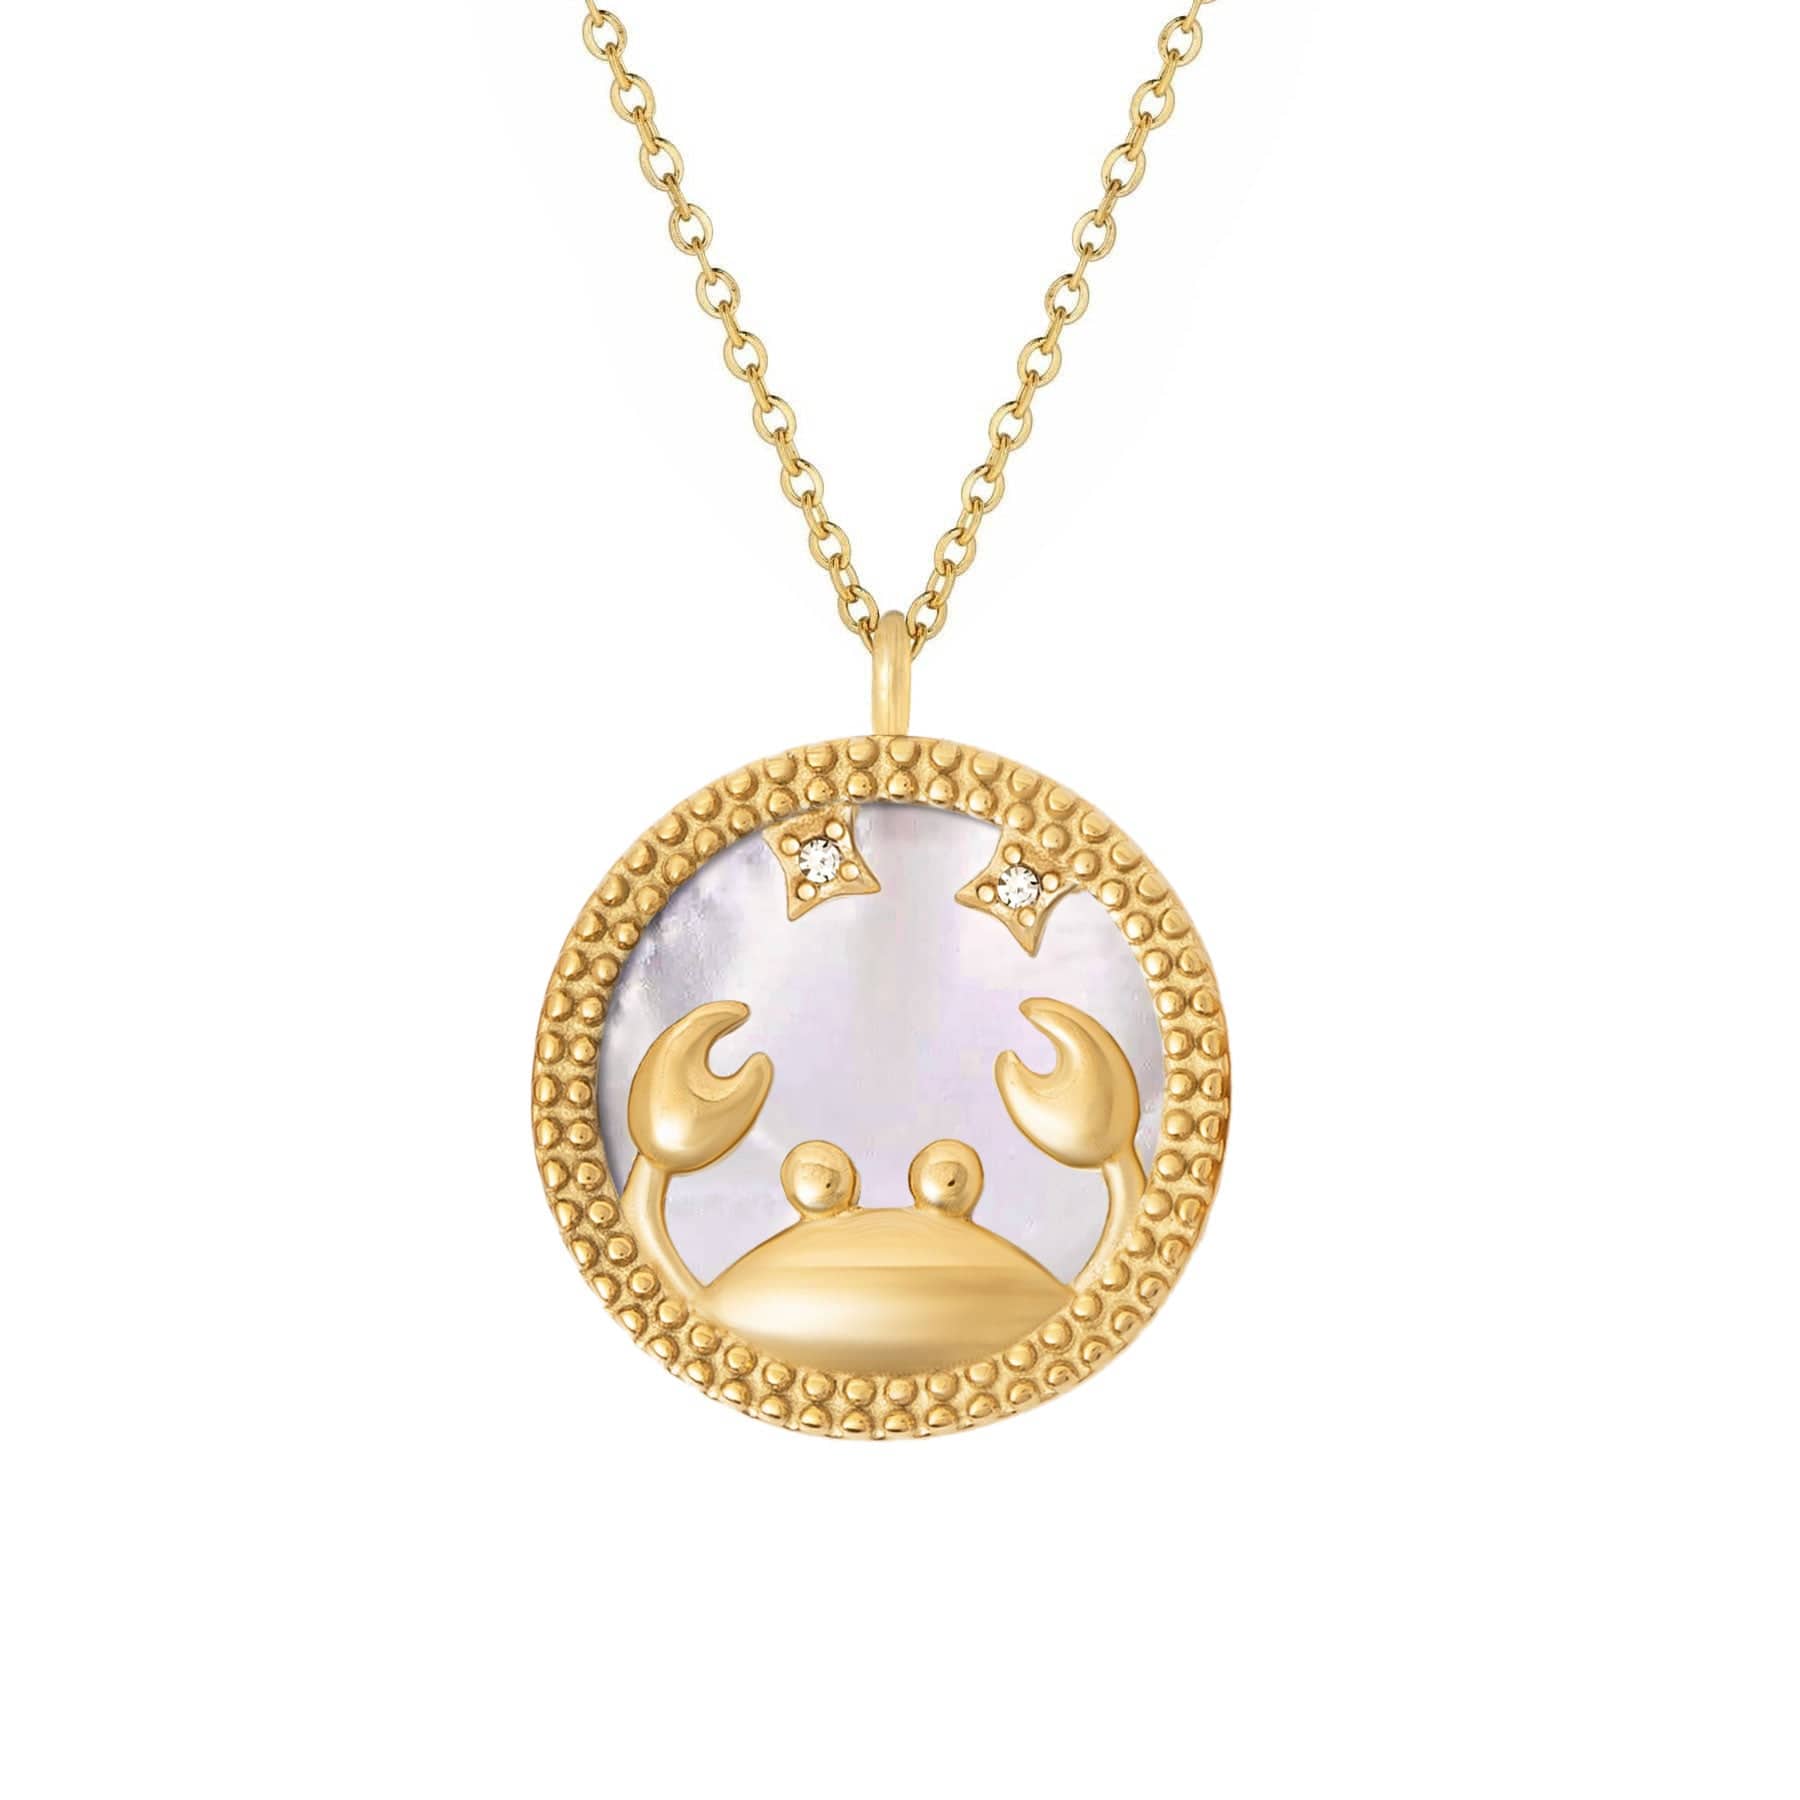 BohoMoon Stainless Steel Symbolic Zodiac Necklace Gold / Cancer